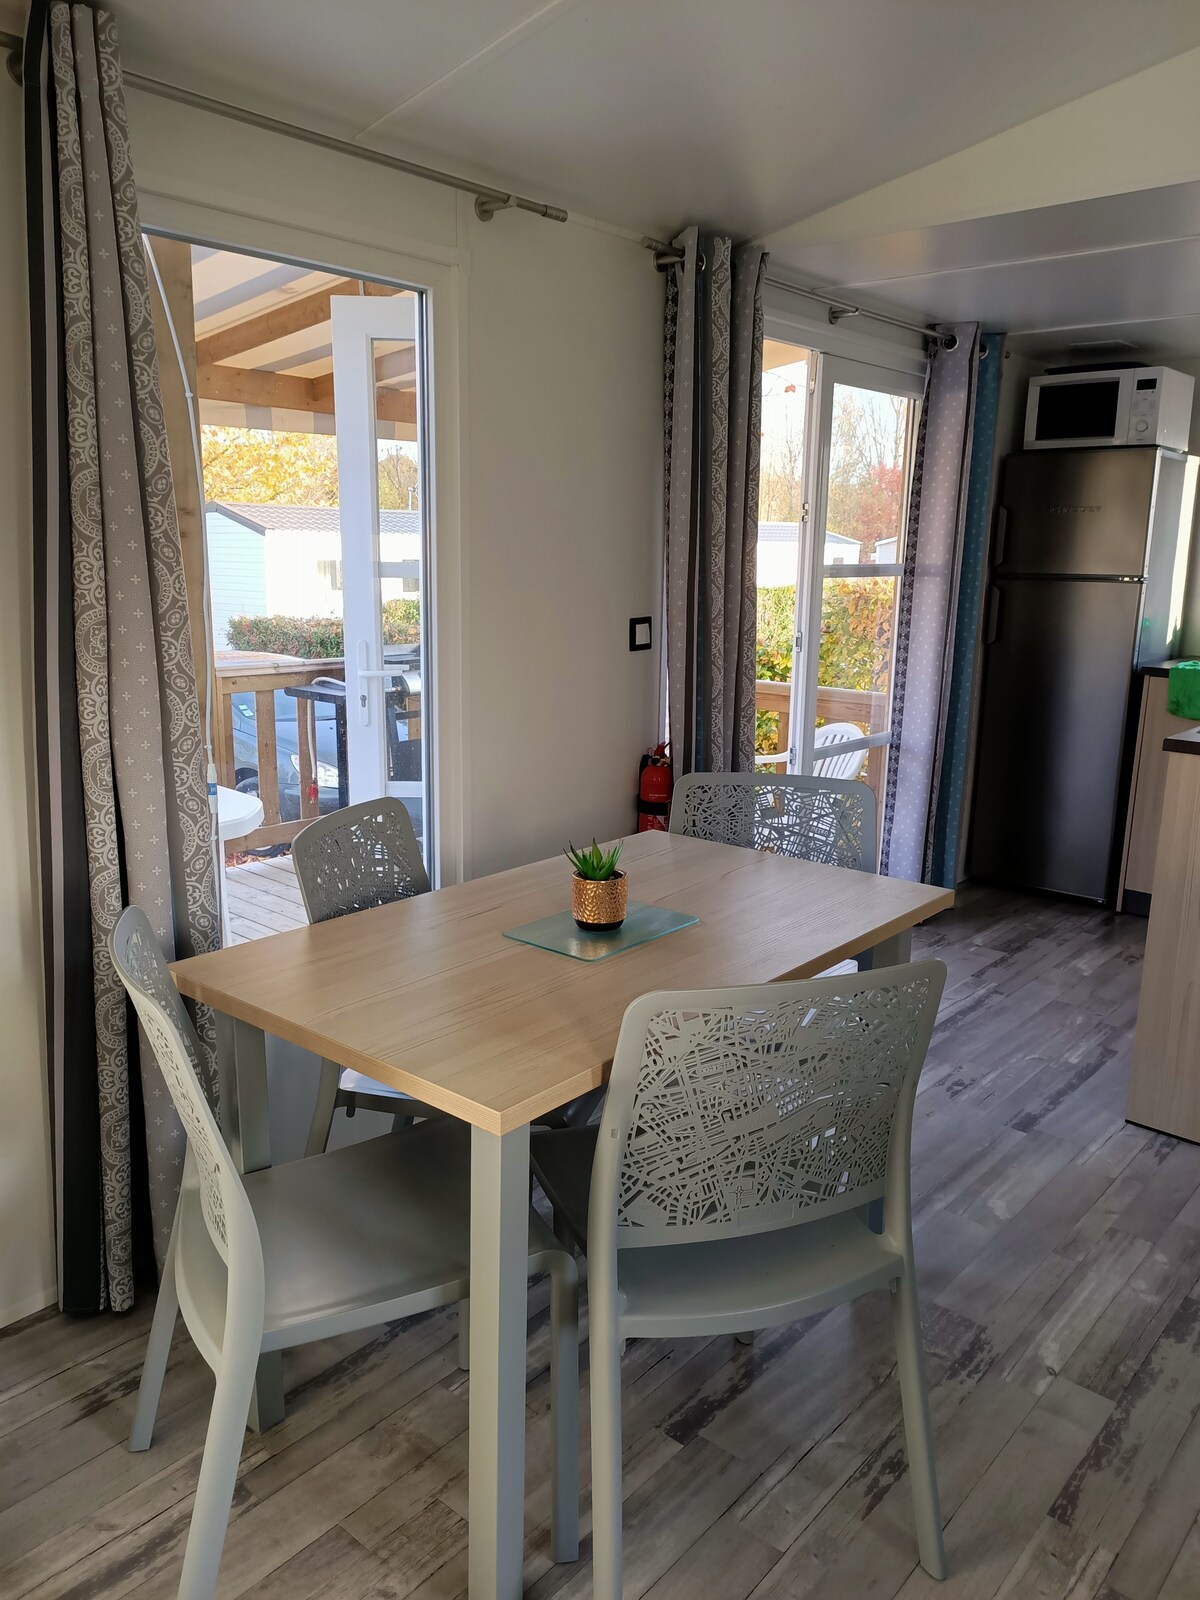 Superbe Mobil home Neuf  2 Chambres  Climatisé